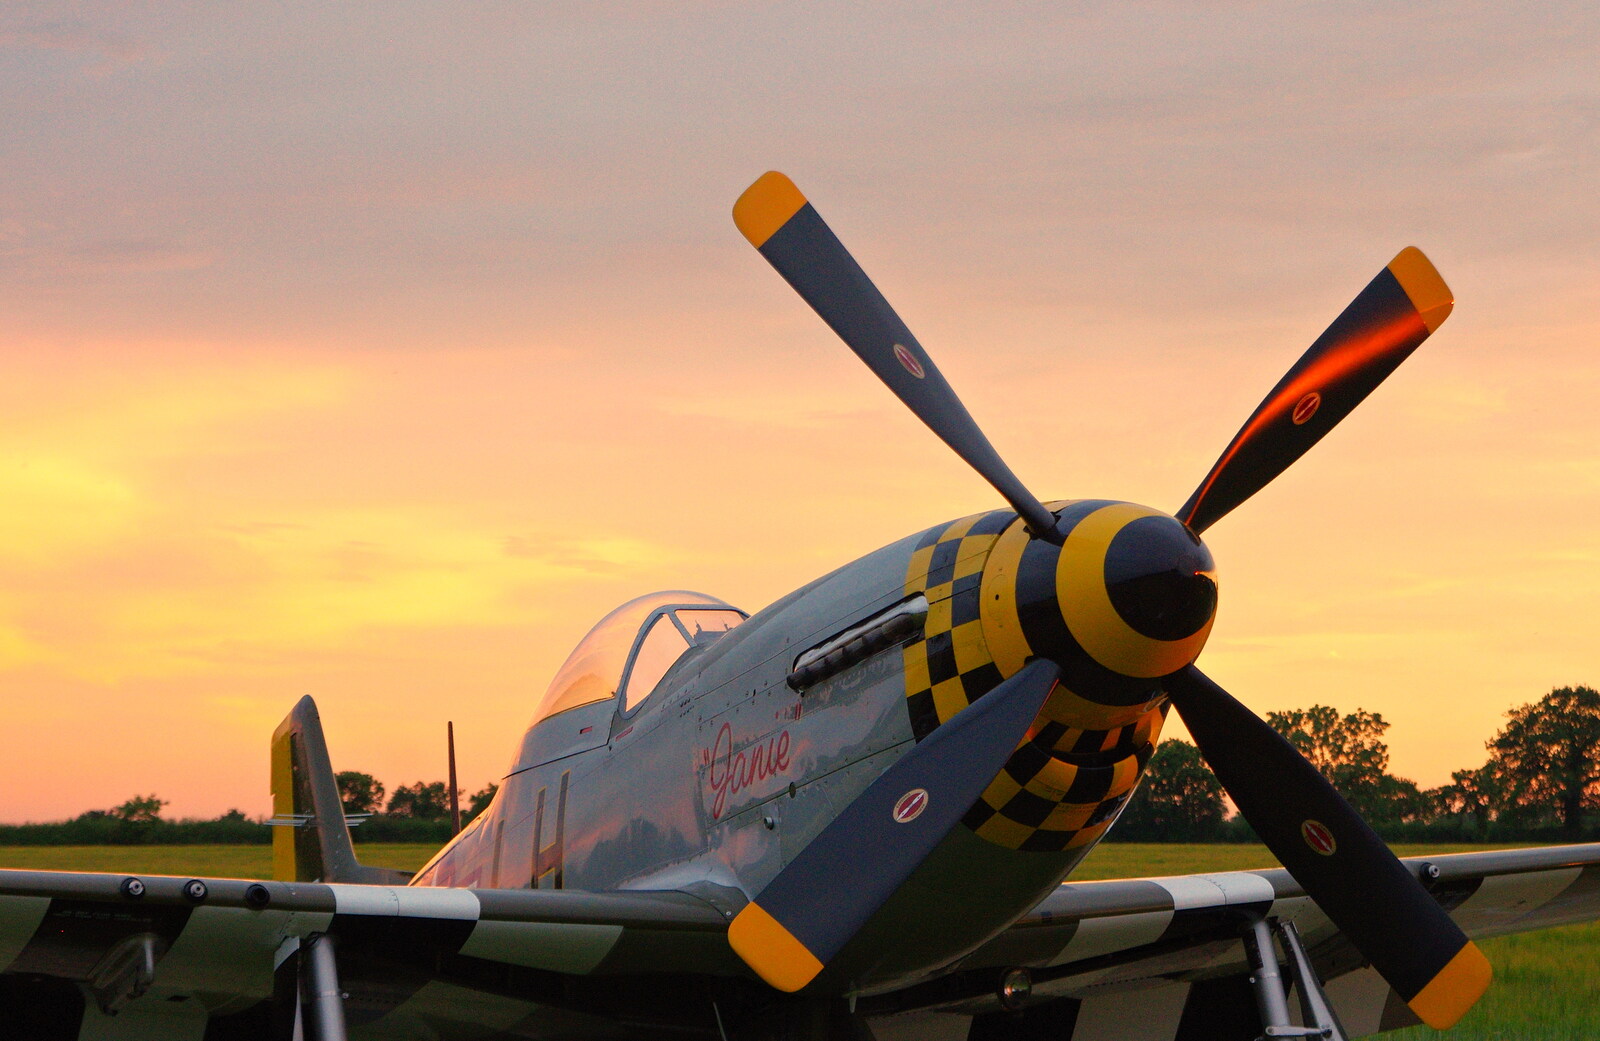 Janie in the sunset from "Our Little Friends" Warbirds Hangar Dance, Hardwick, Norfolk - 9th July 2016